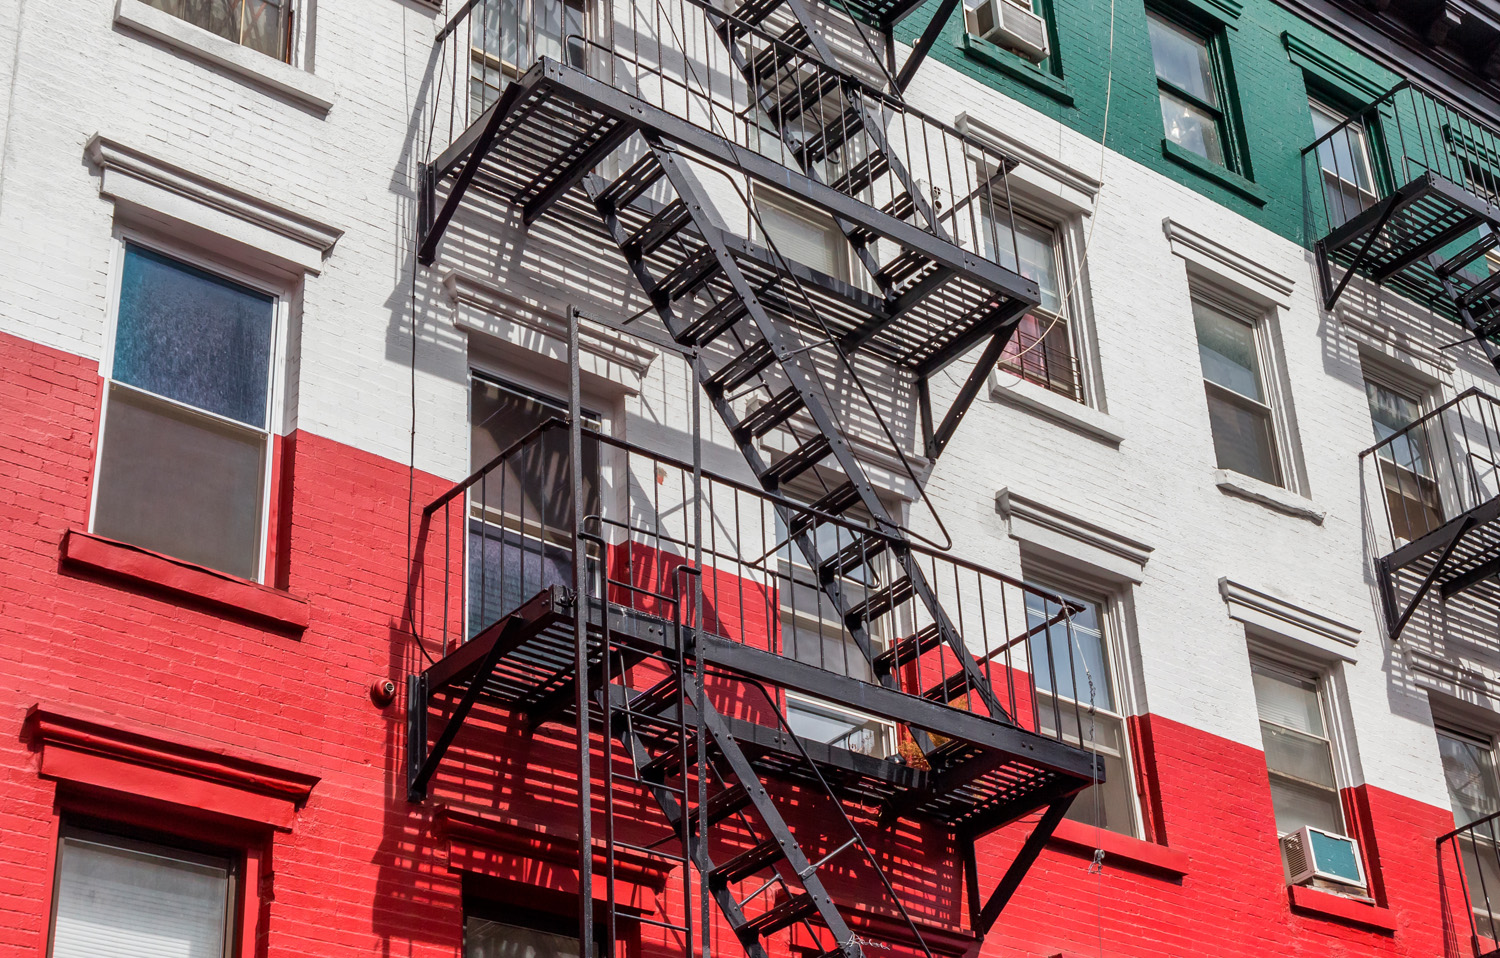 Building in the colors of the Italian flag in Little Italy, New York, USA